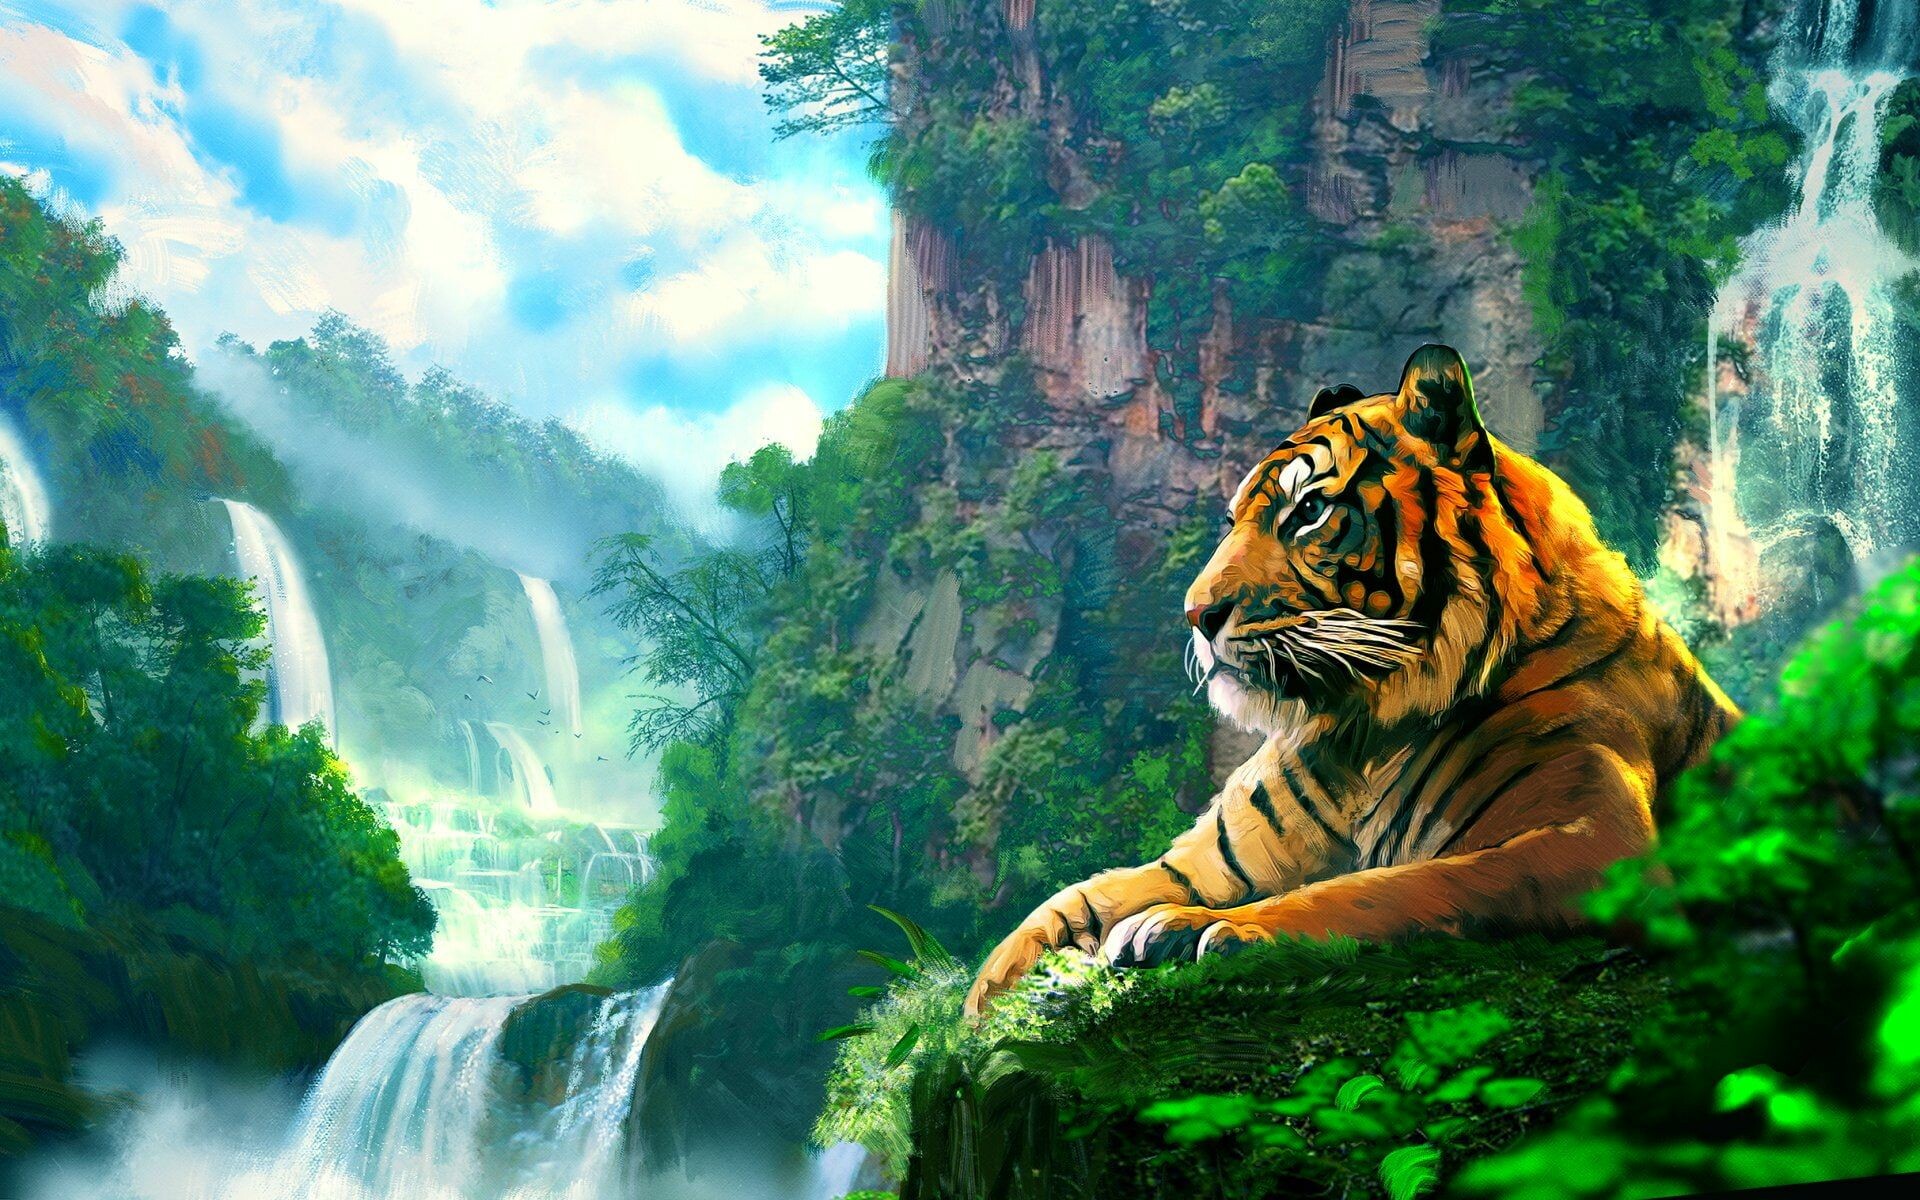 Tiger: Female tigers often remain near their mother's territory, while males disperse farther from home. 1920x1200 HD Wallpaper.